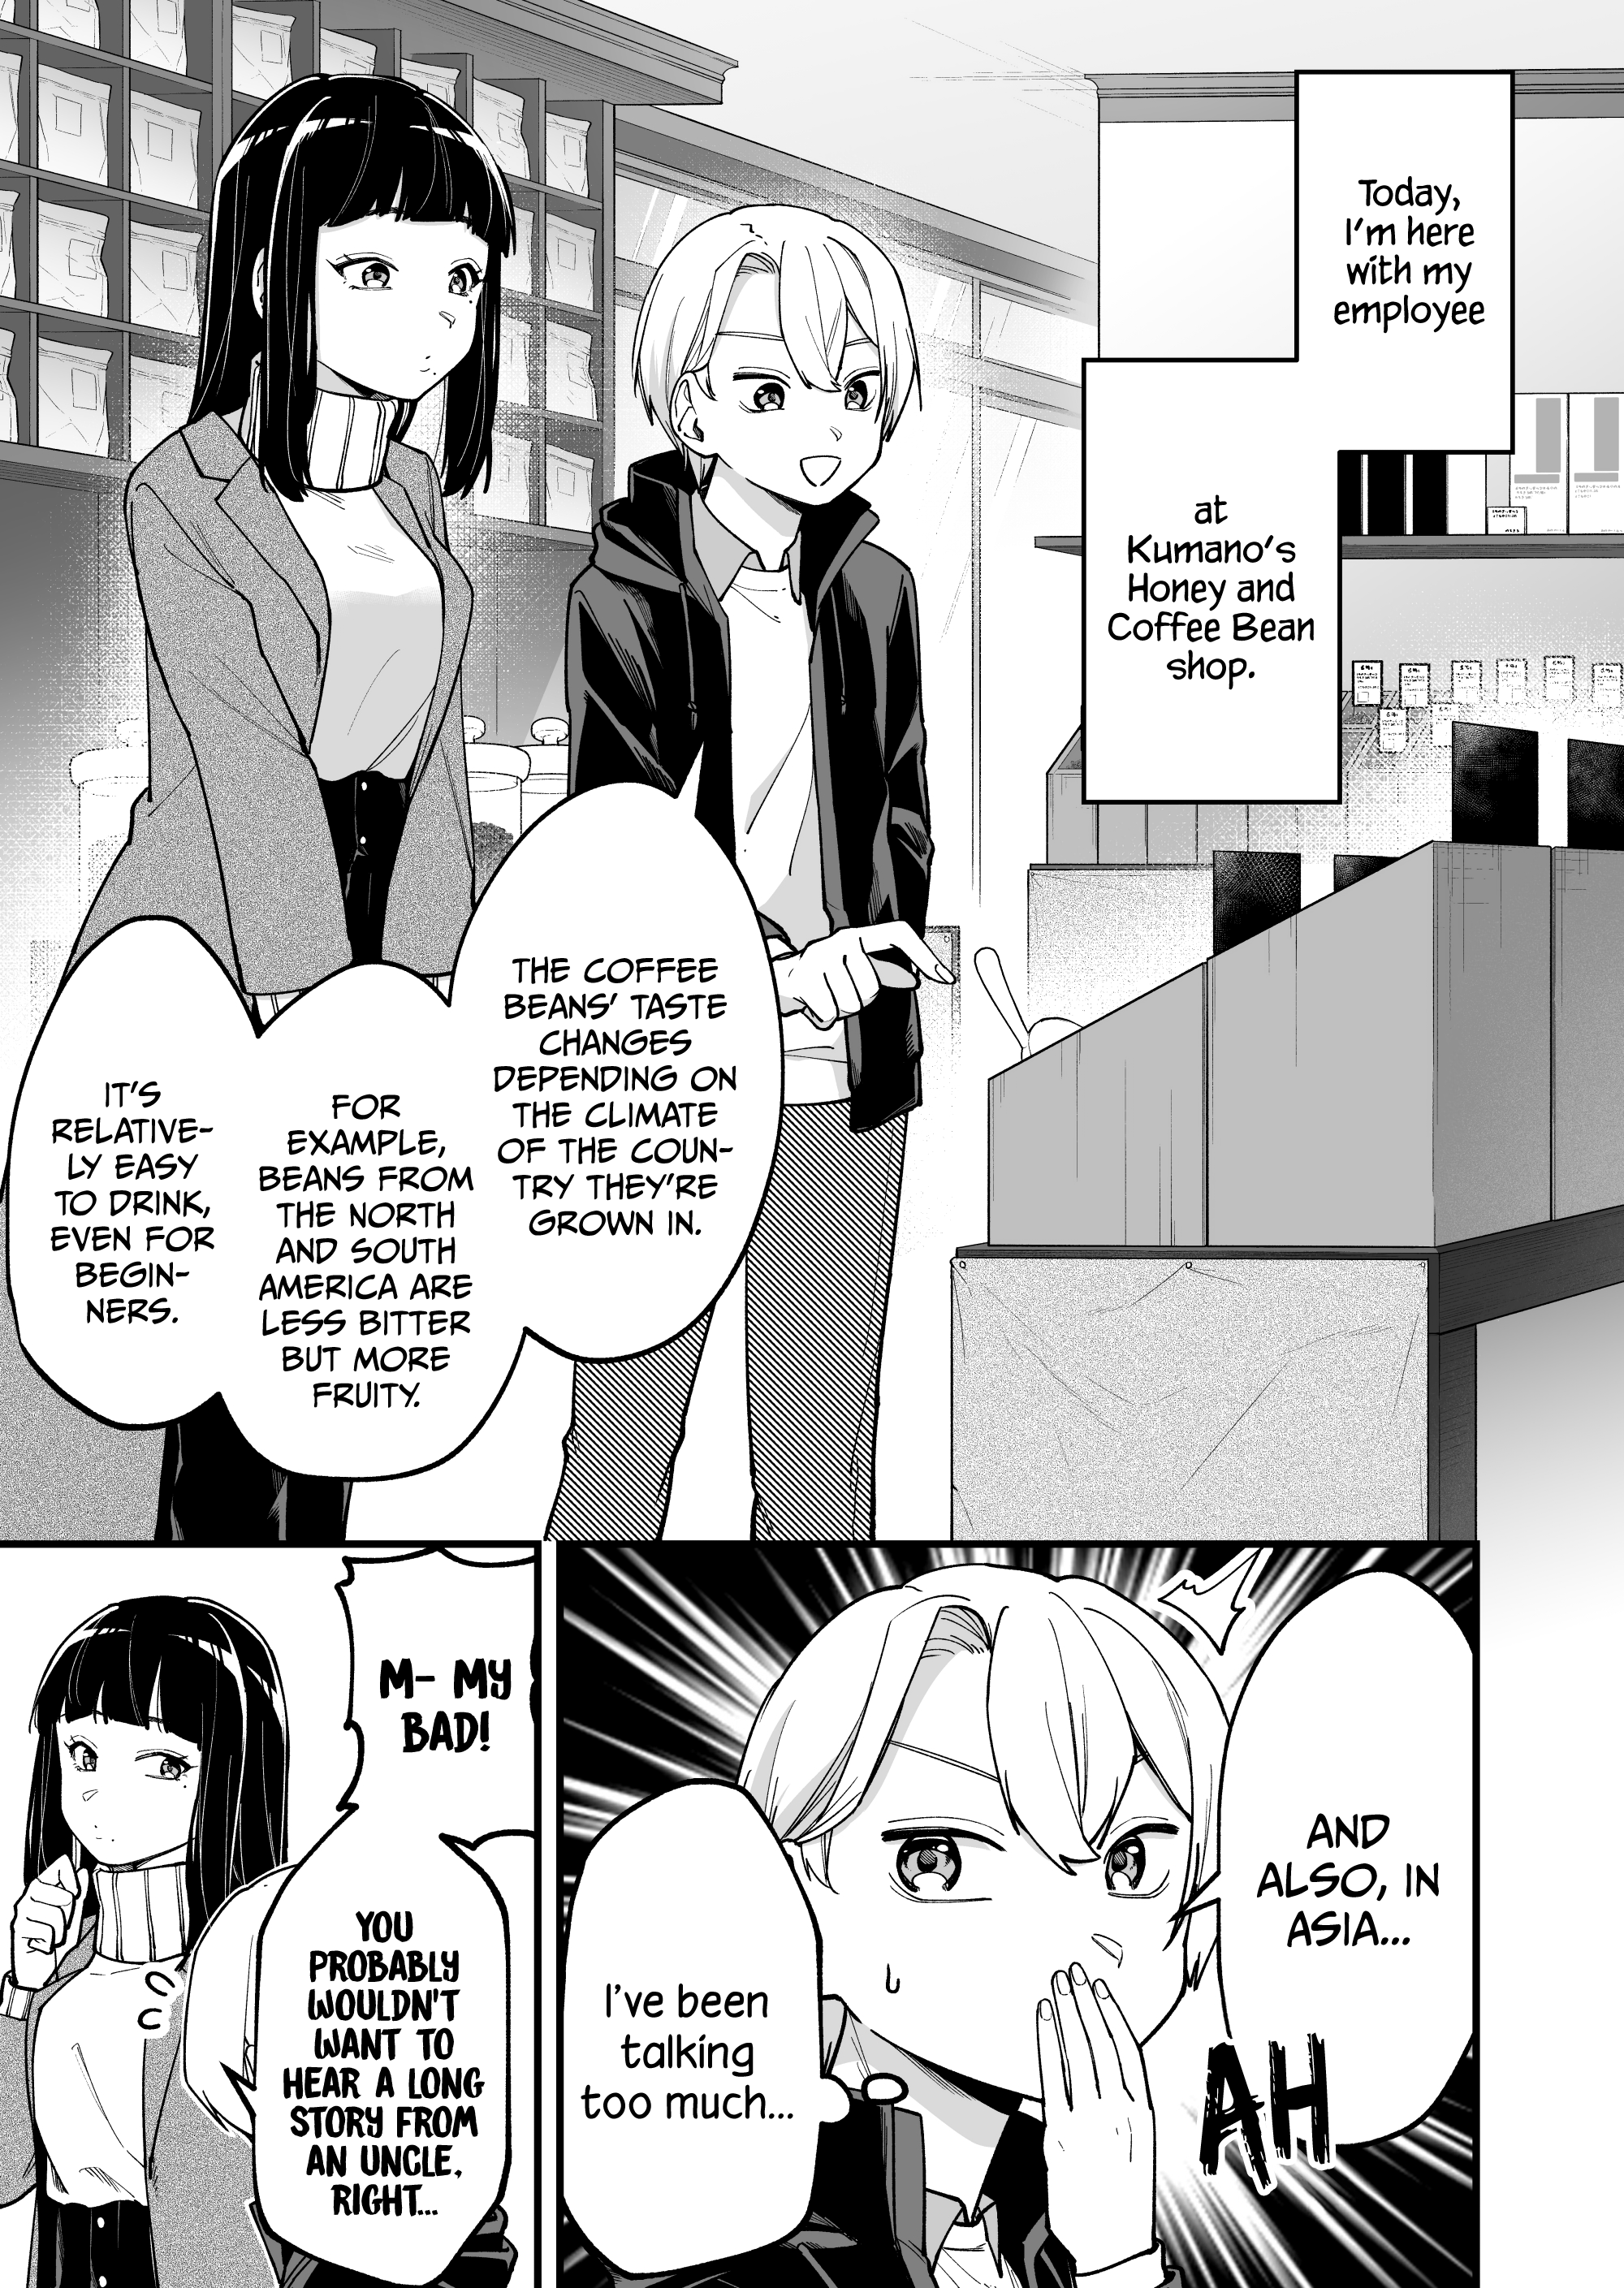 The Manager And The Oblivious Waitress - Page 2